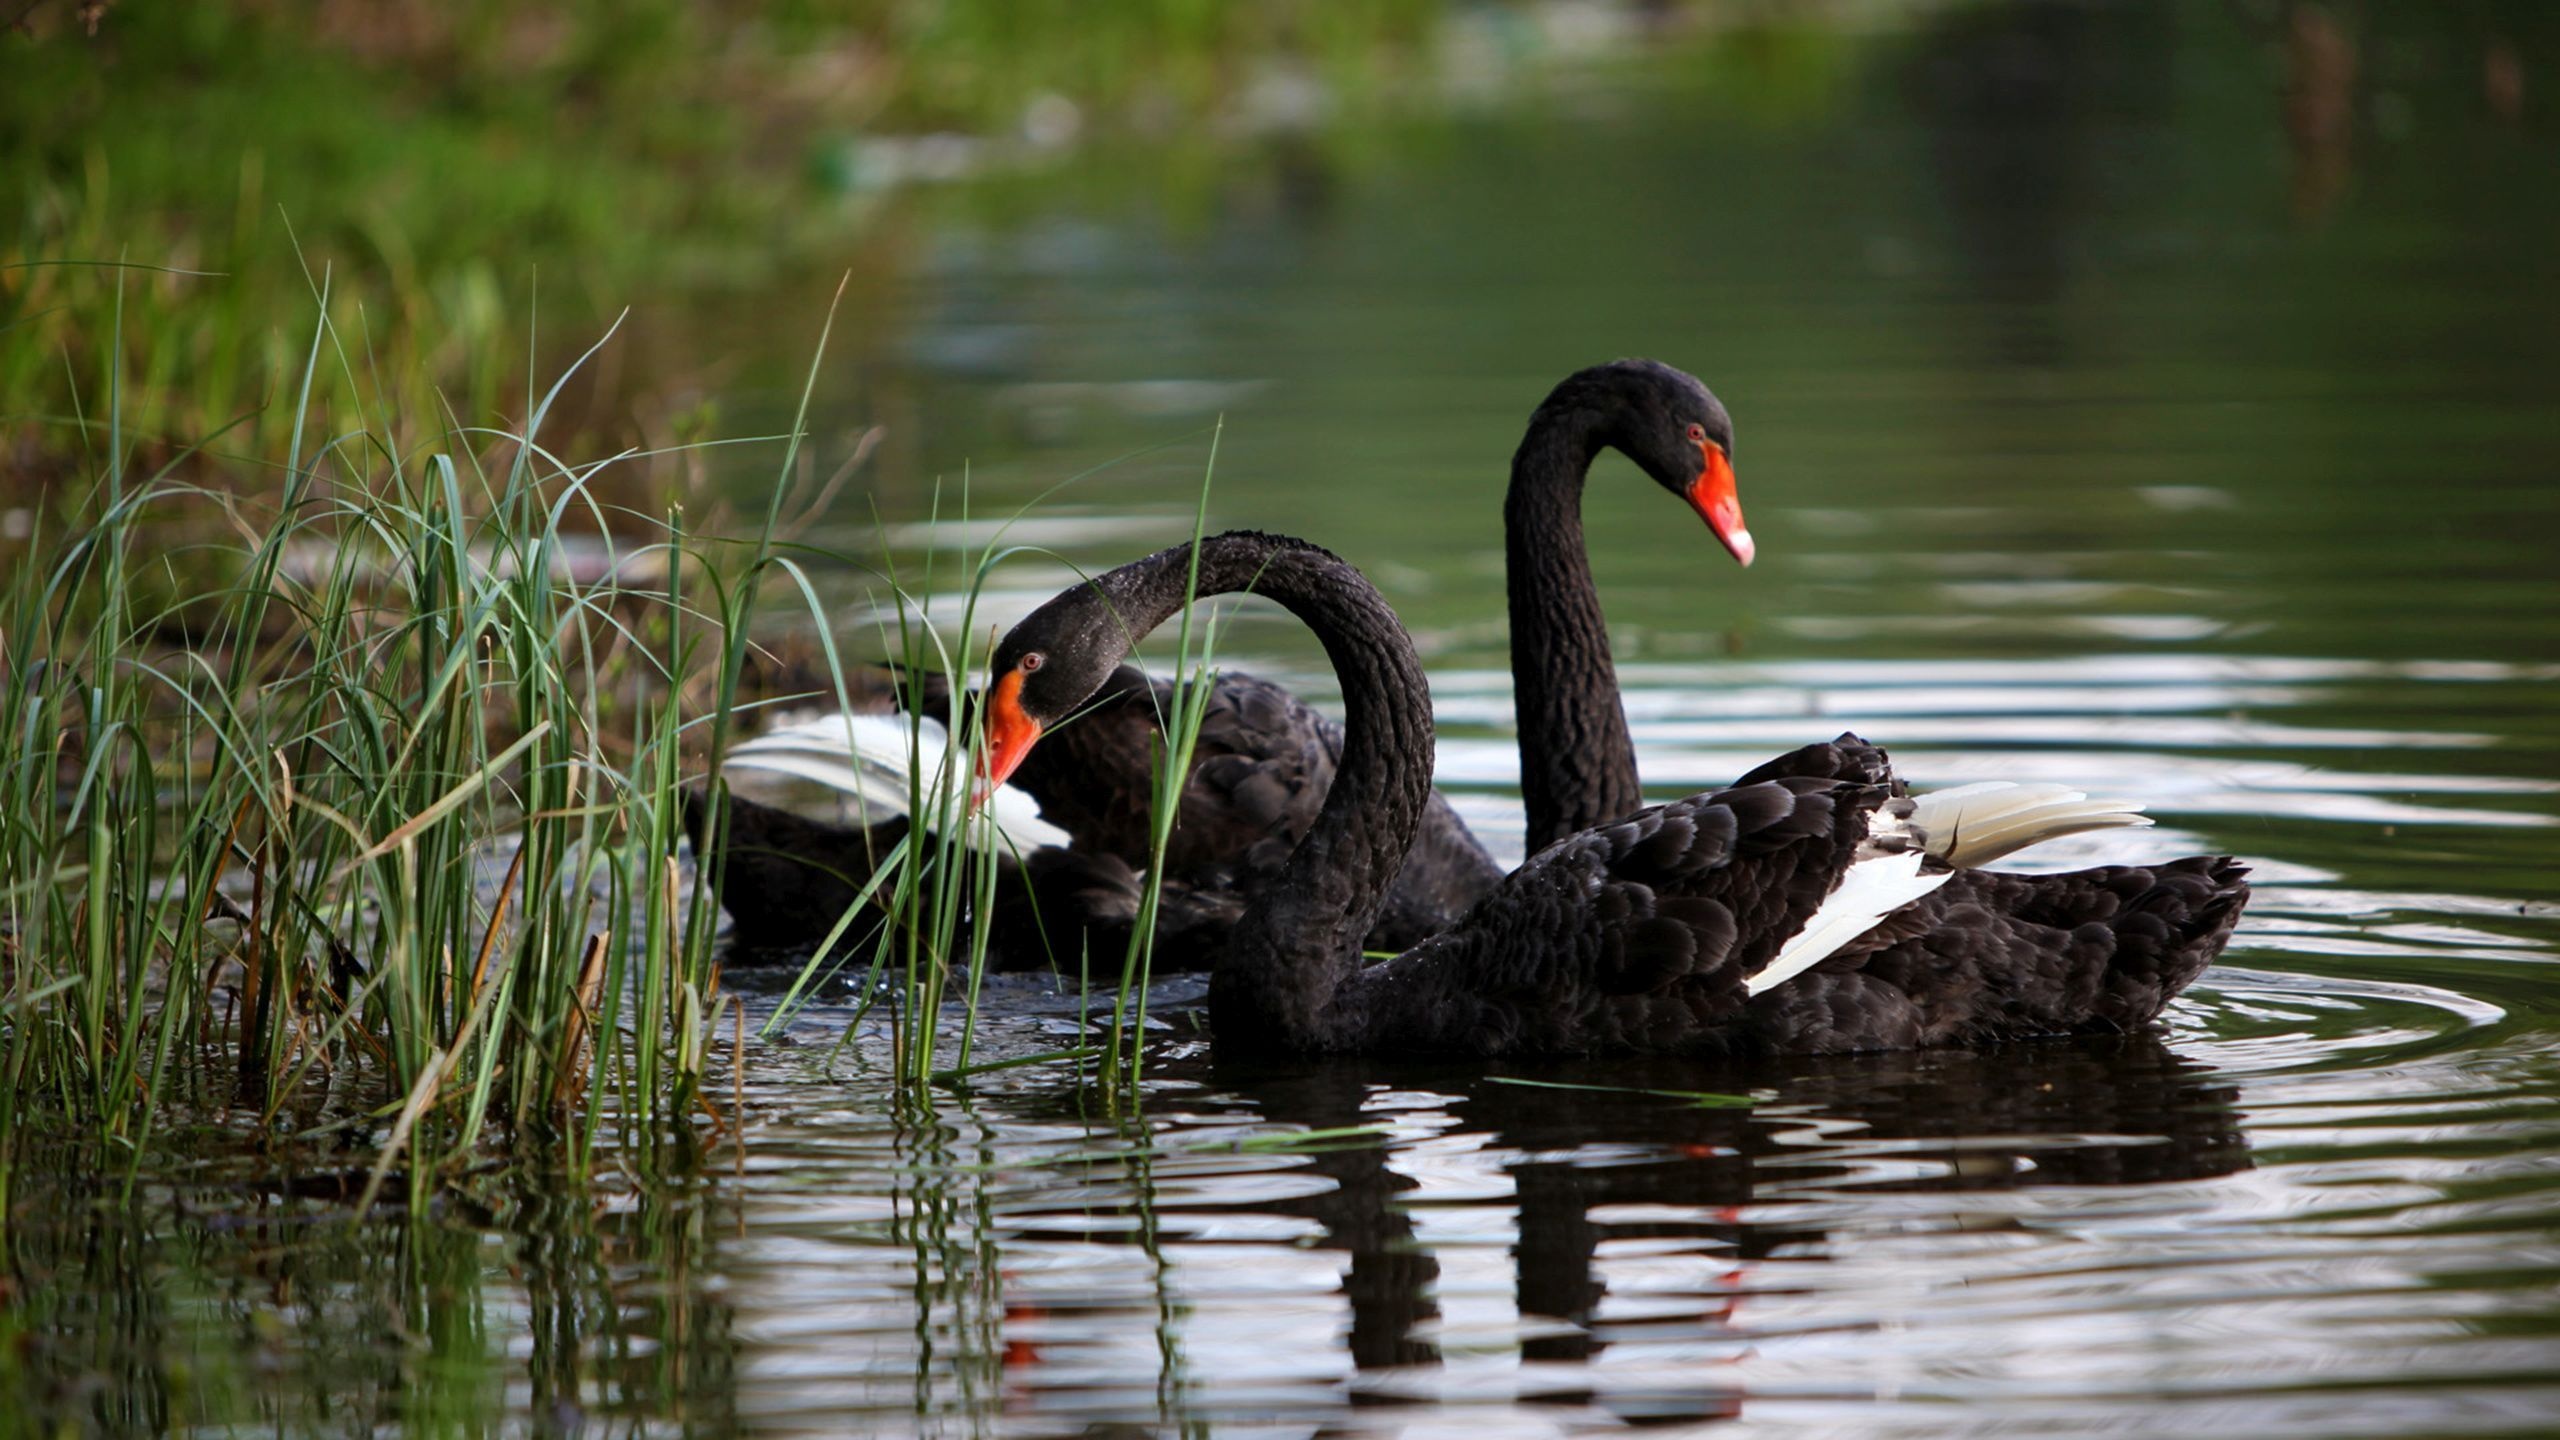 Black Swan (Bird): Black-feathered birds with white flight feathers. 2560x1440 HD Wallpaper.